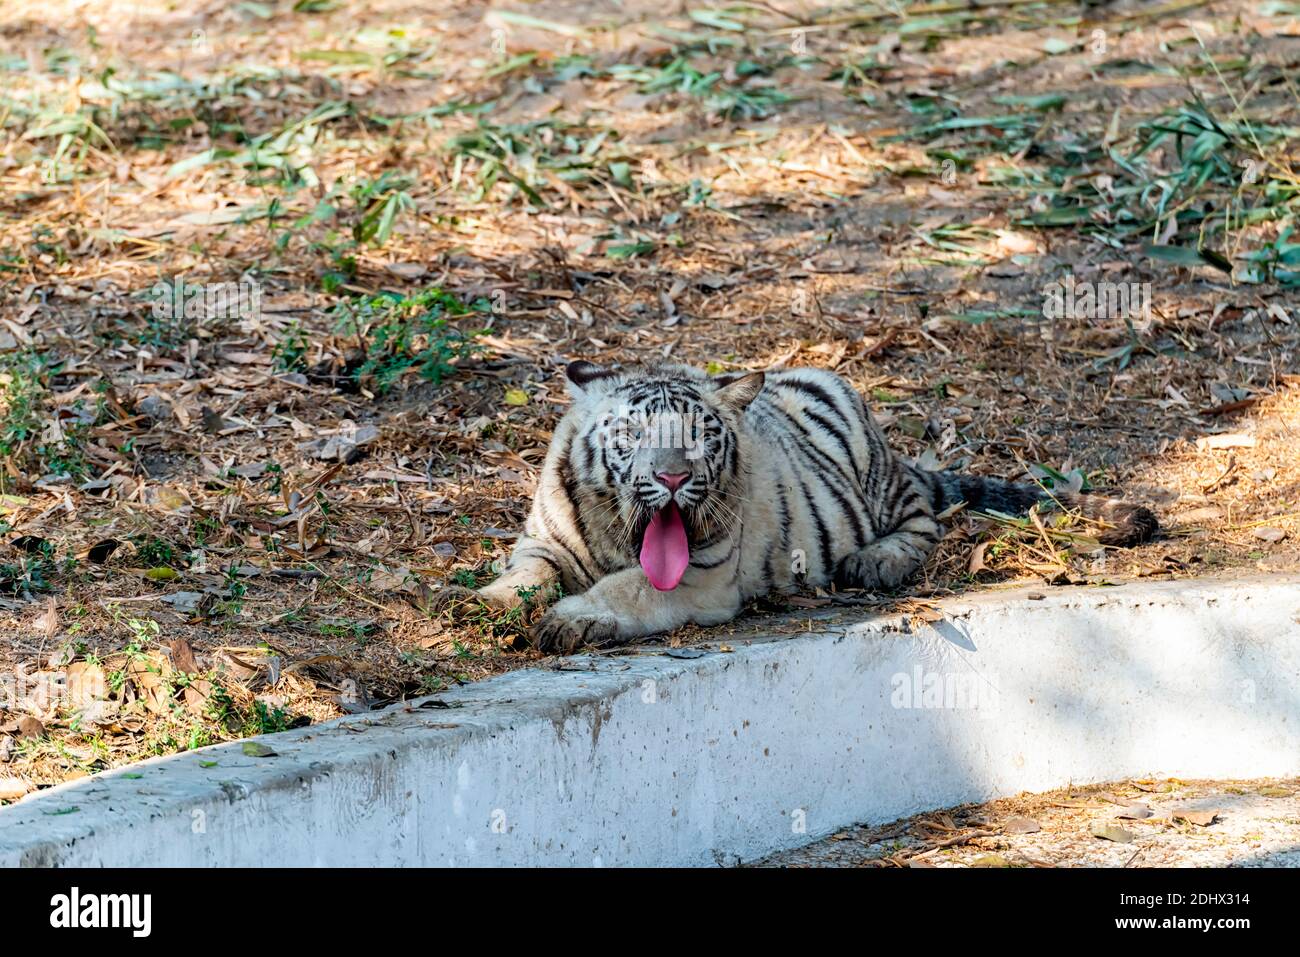 A white tiger cub, panting in the afternoon heat, in the tiger enclosure at the National Zoological Park Delhi, also known as the Delhi Zoo. Stock Photo